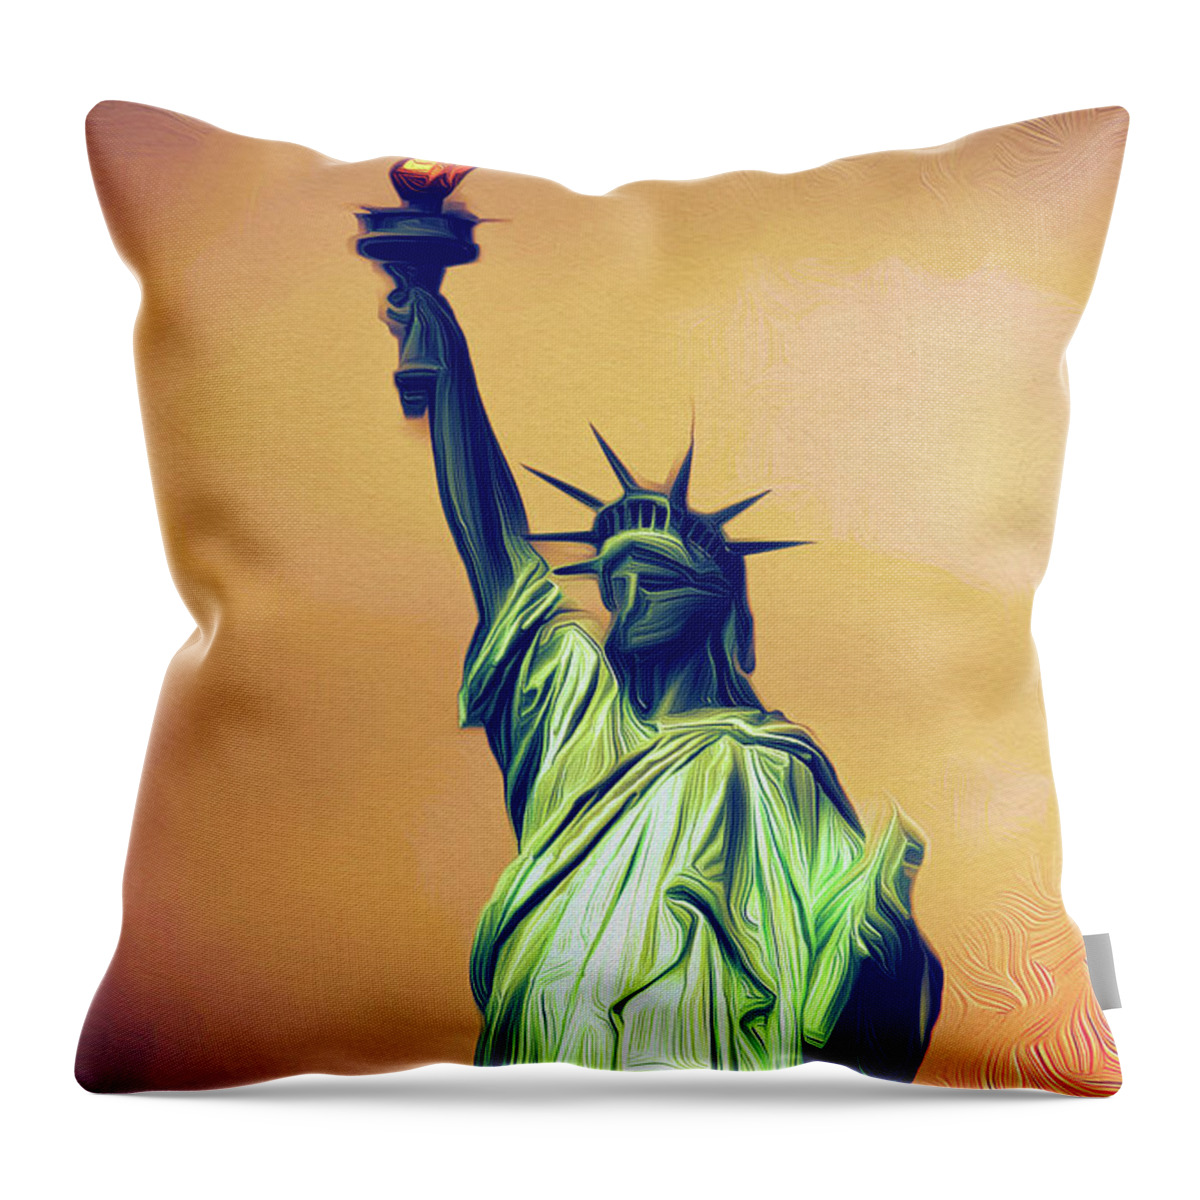 Statue Throw Pillow featuring the painting Lady Liberty by Prince Andre Faubert